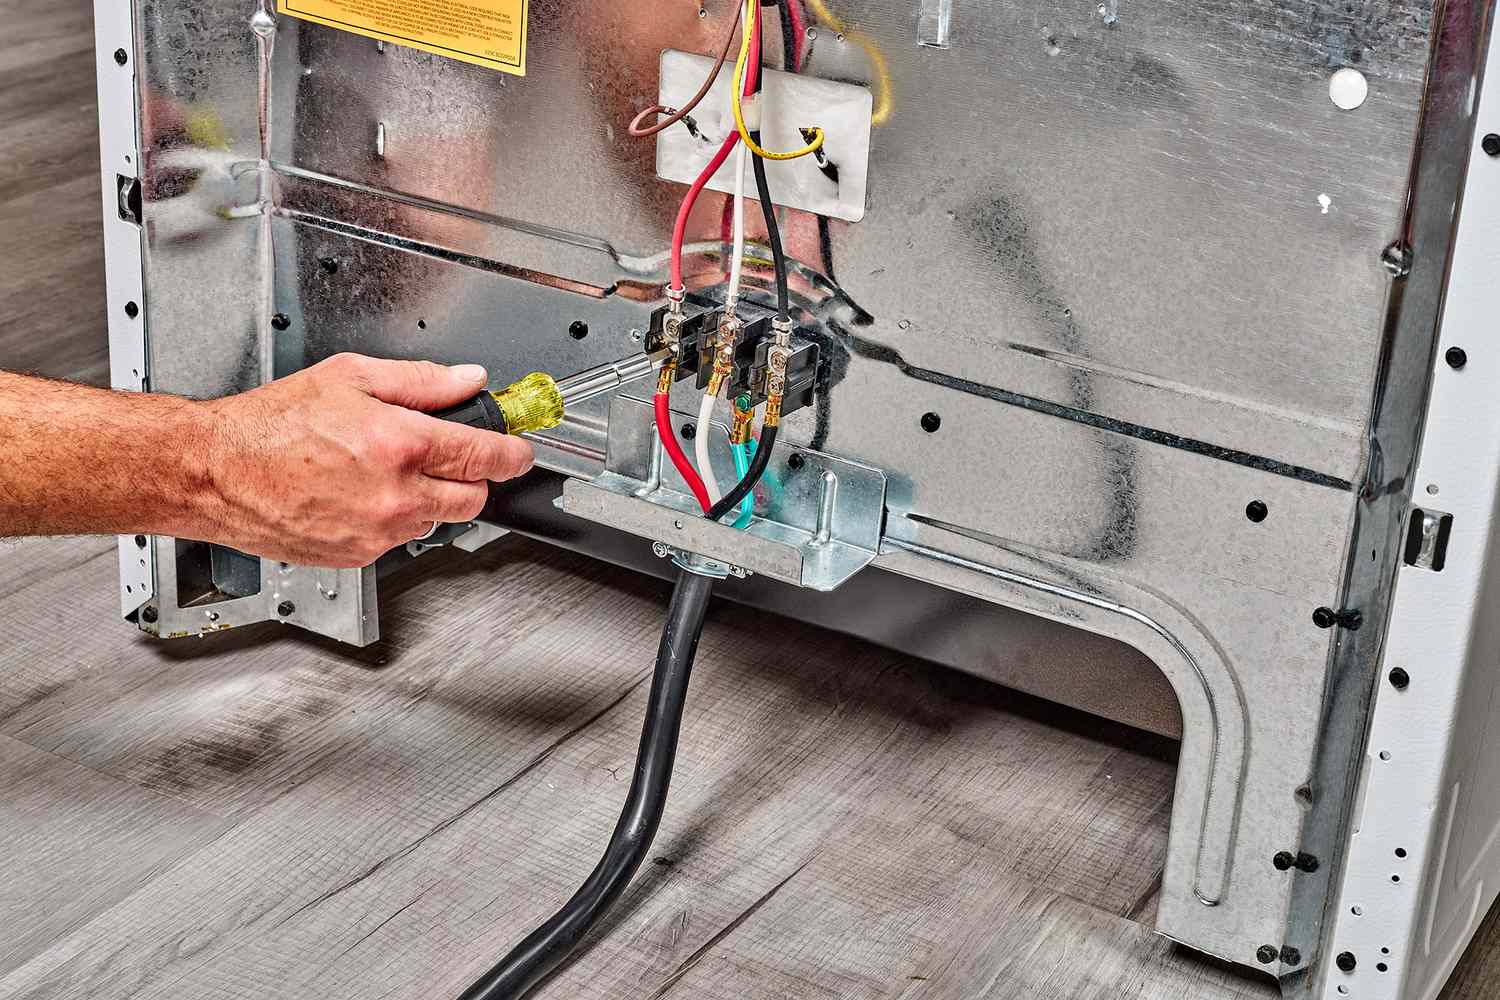 How To Connect Electrical Cord To Whirlpool Range